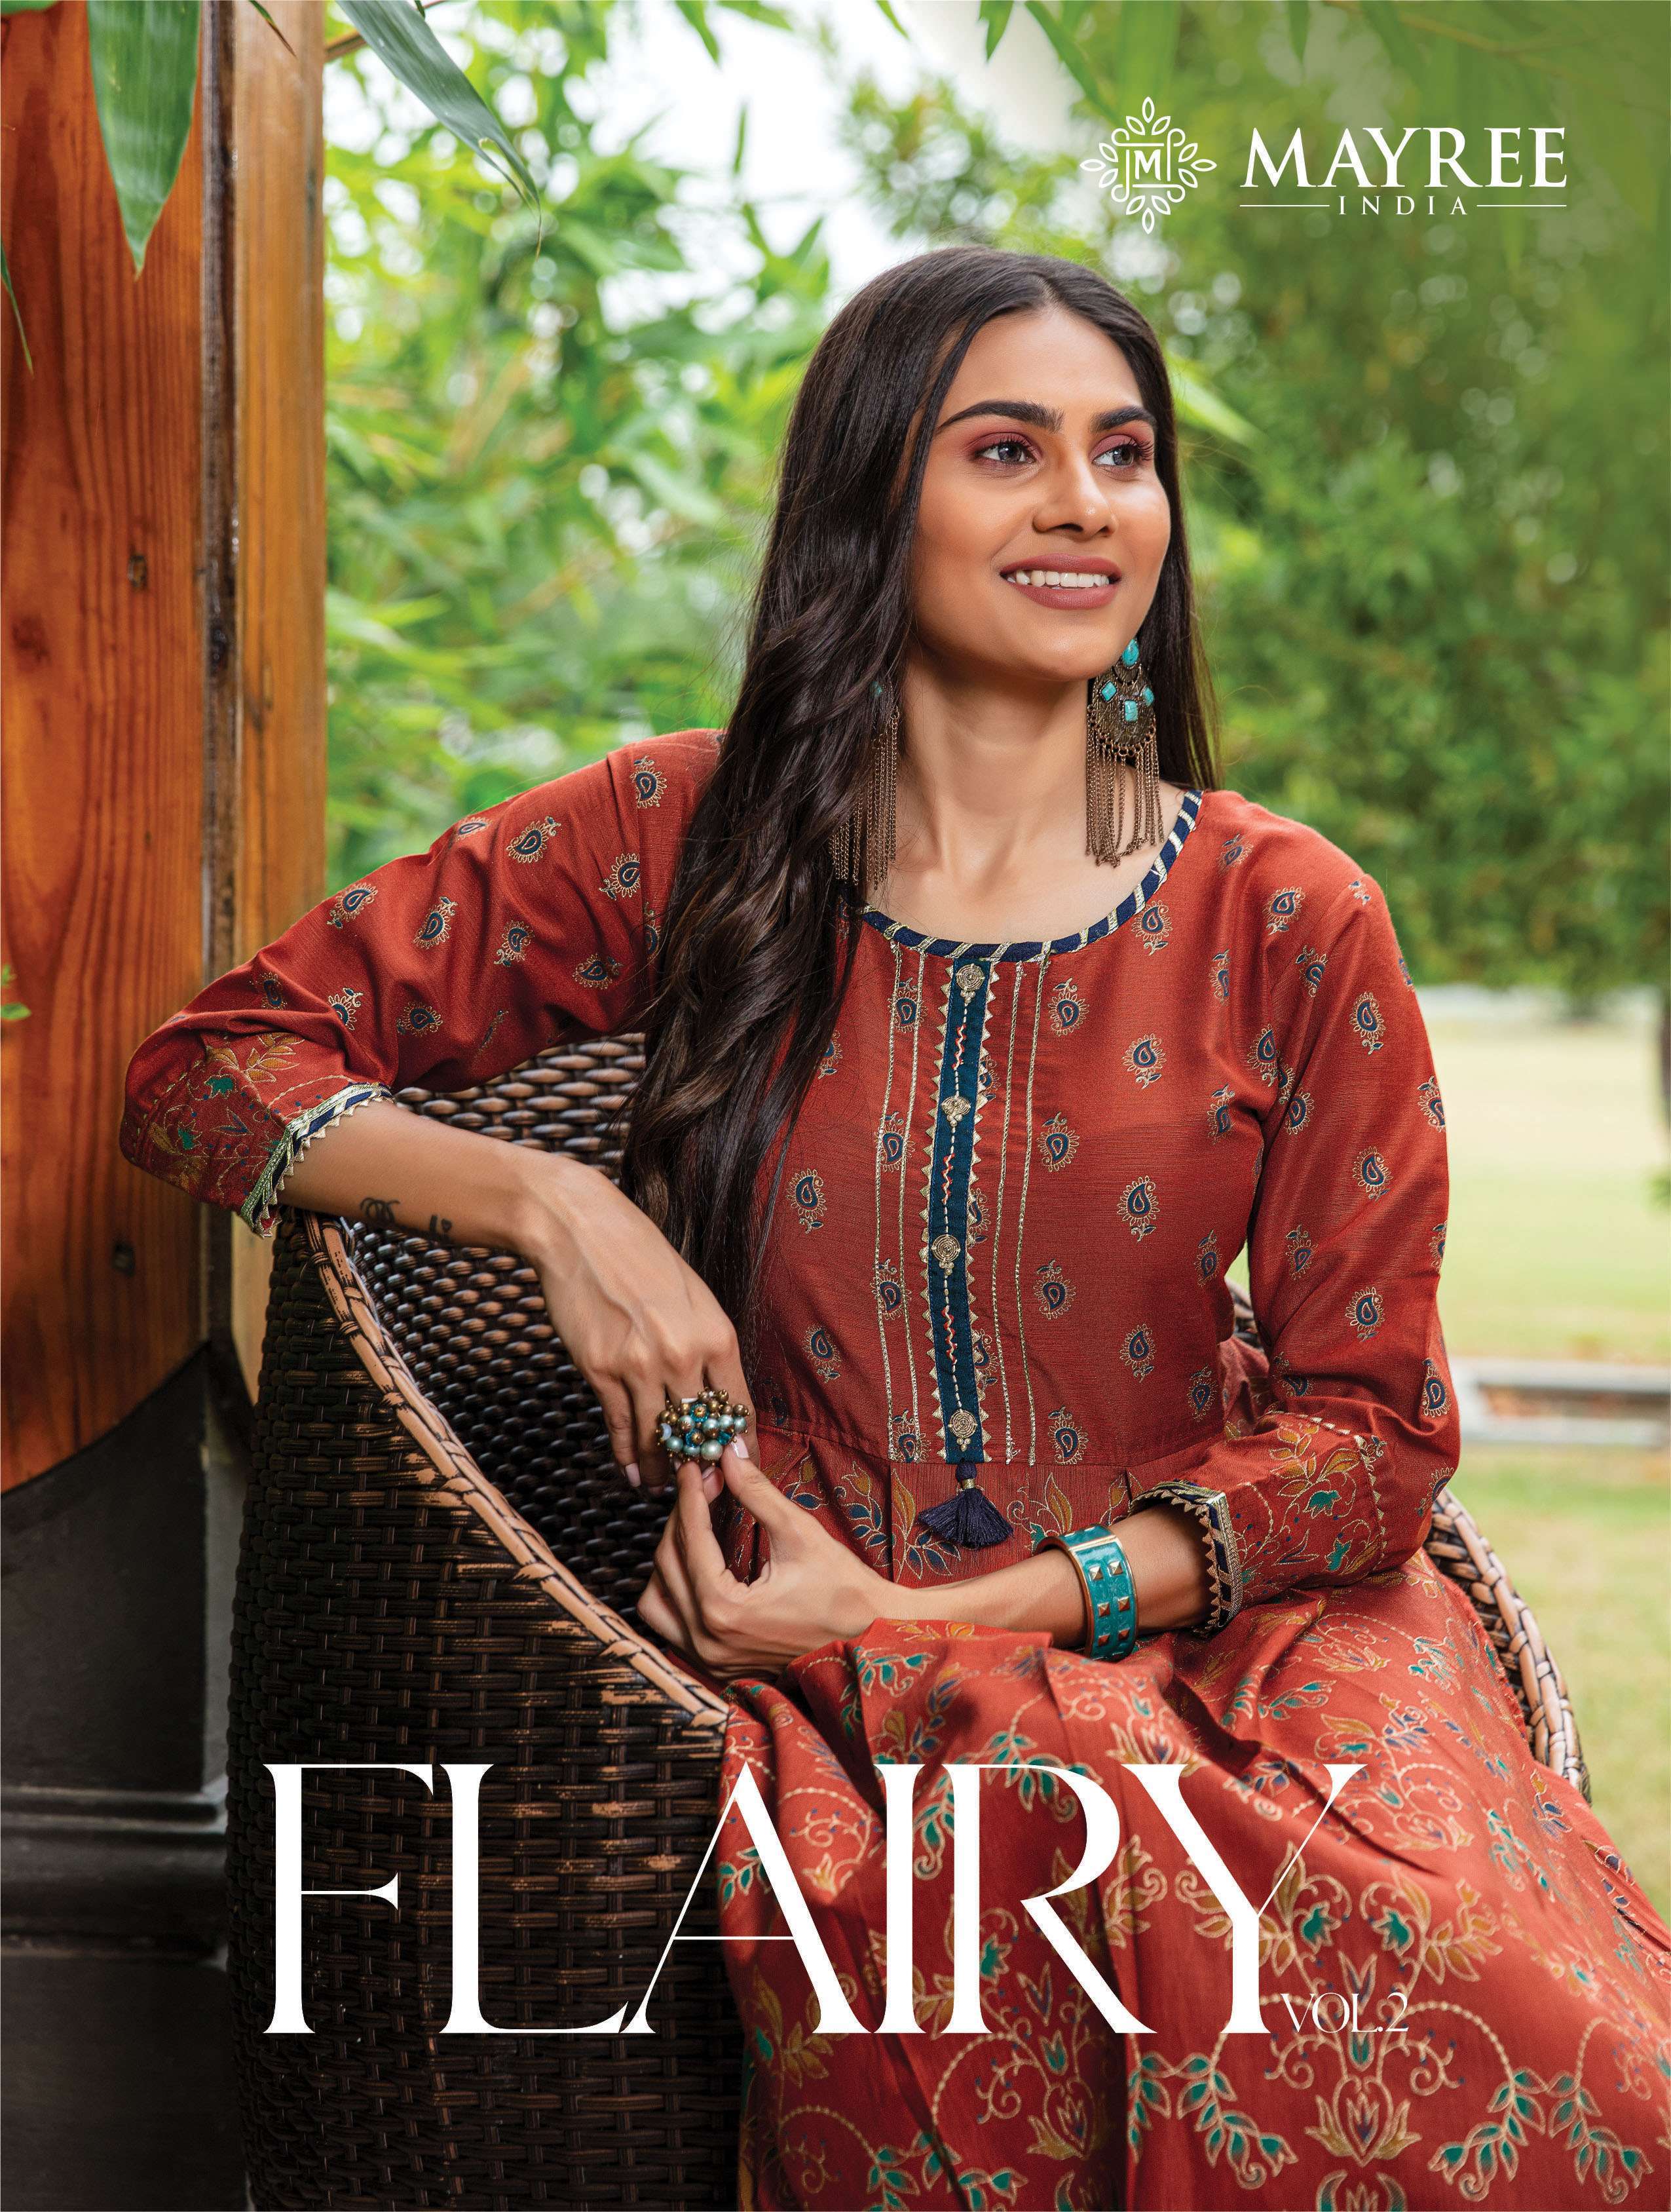 mayree india flairy vol 2 series 201-206 Heavy Silk gold print long floor gown